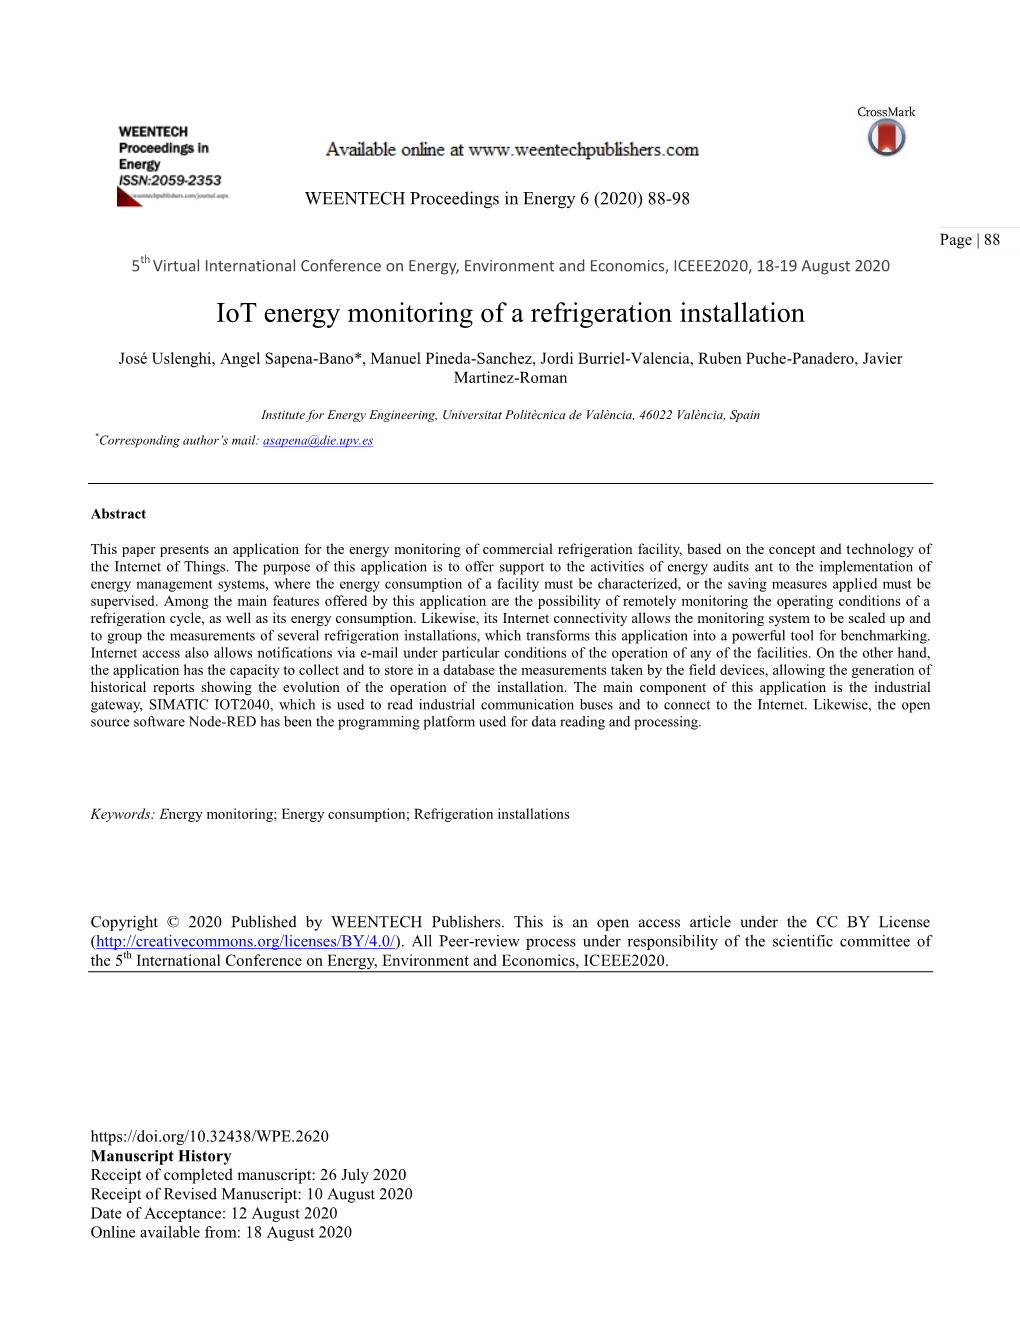 Iot Energy Monitoring of a Refrigeration Installation